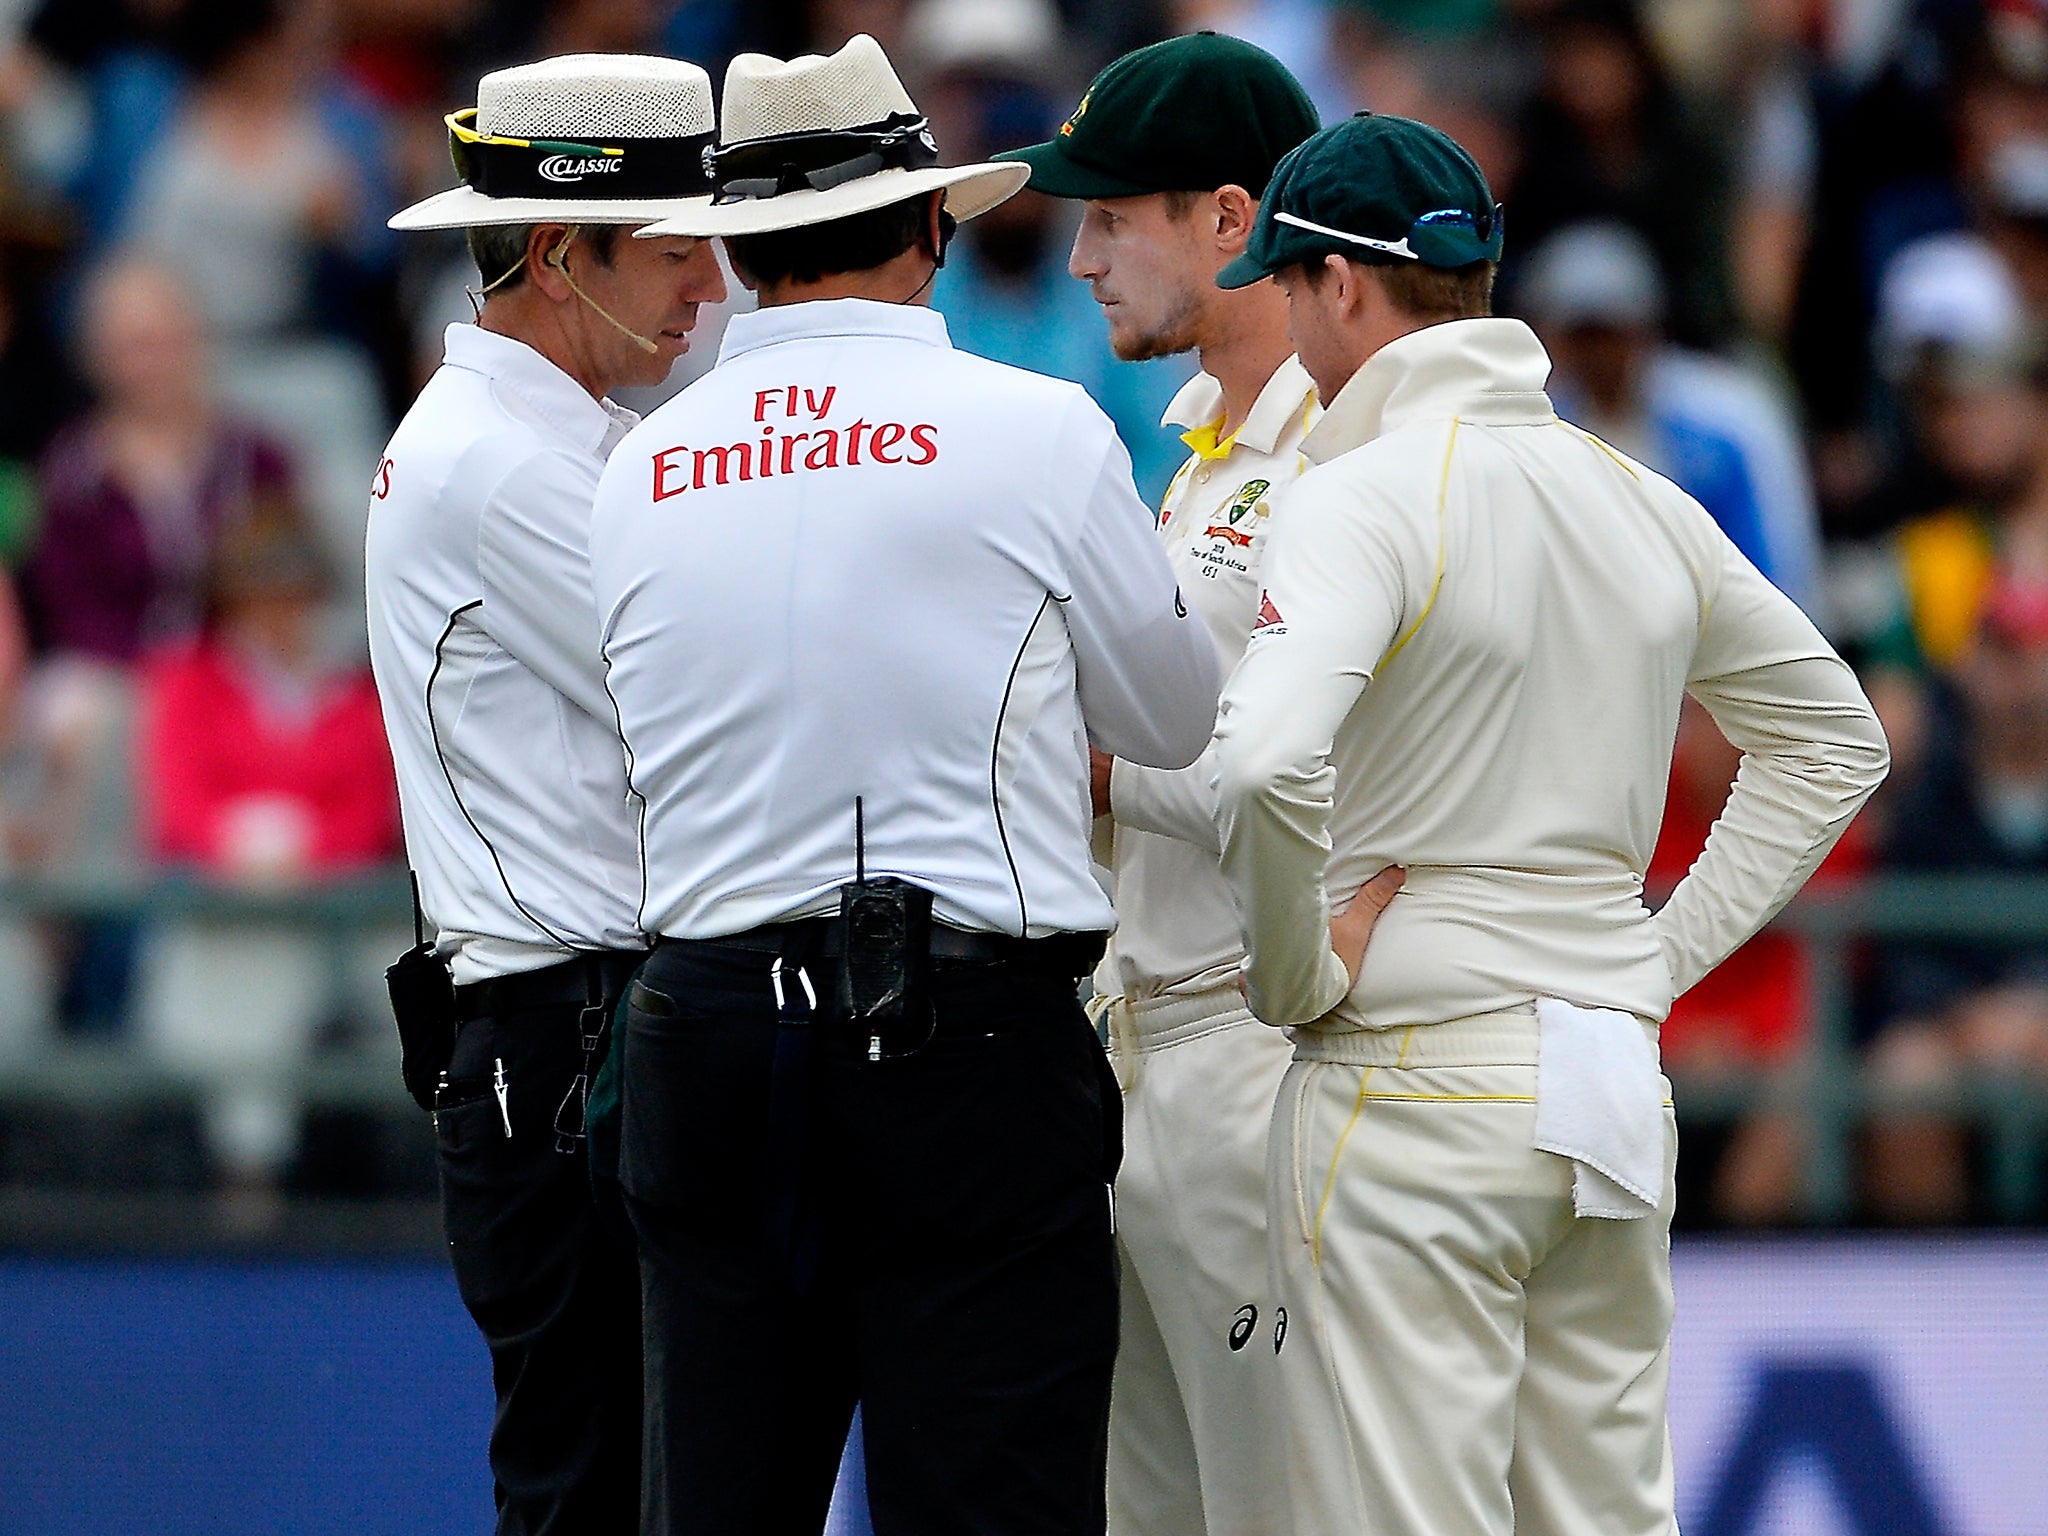 Cameron Bancroft was spoken to by the match umpires after being suspected of ball-tampering